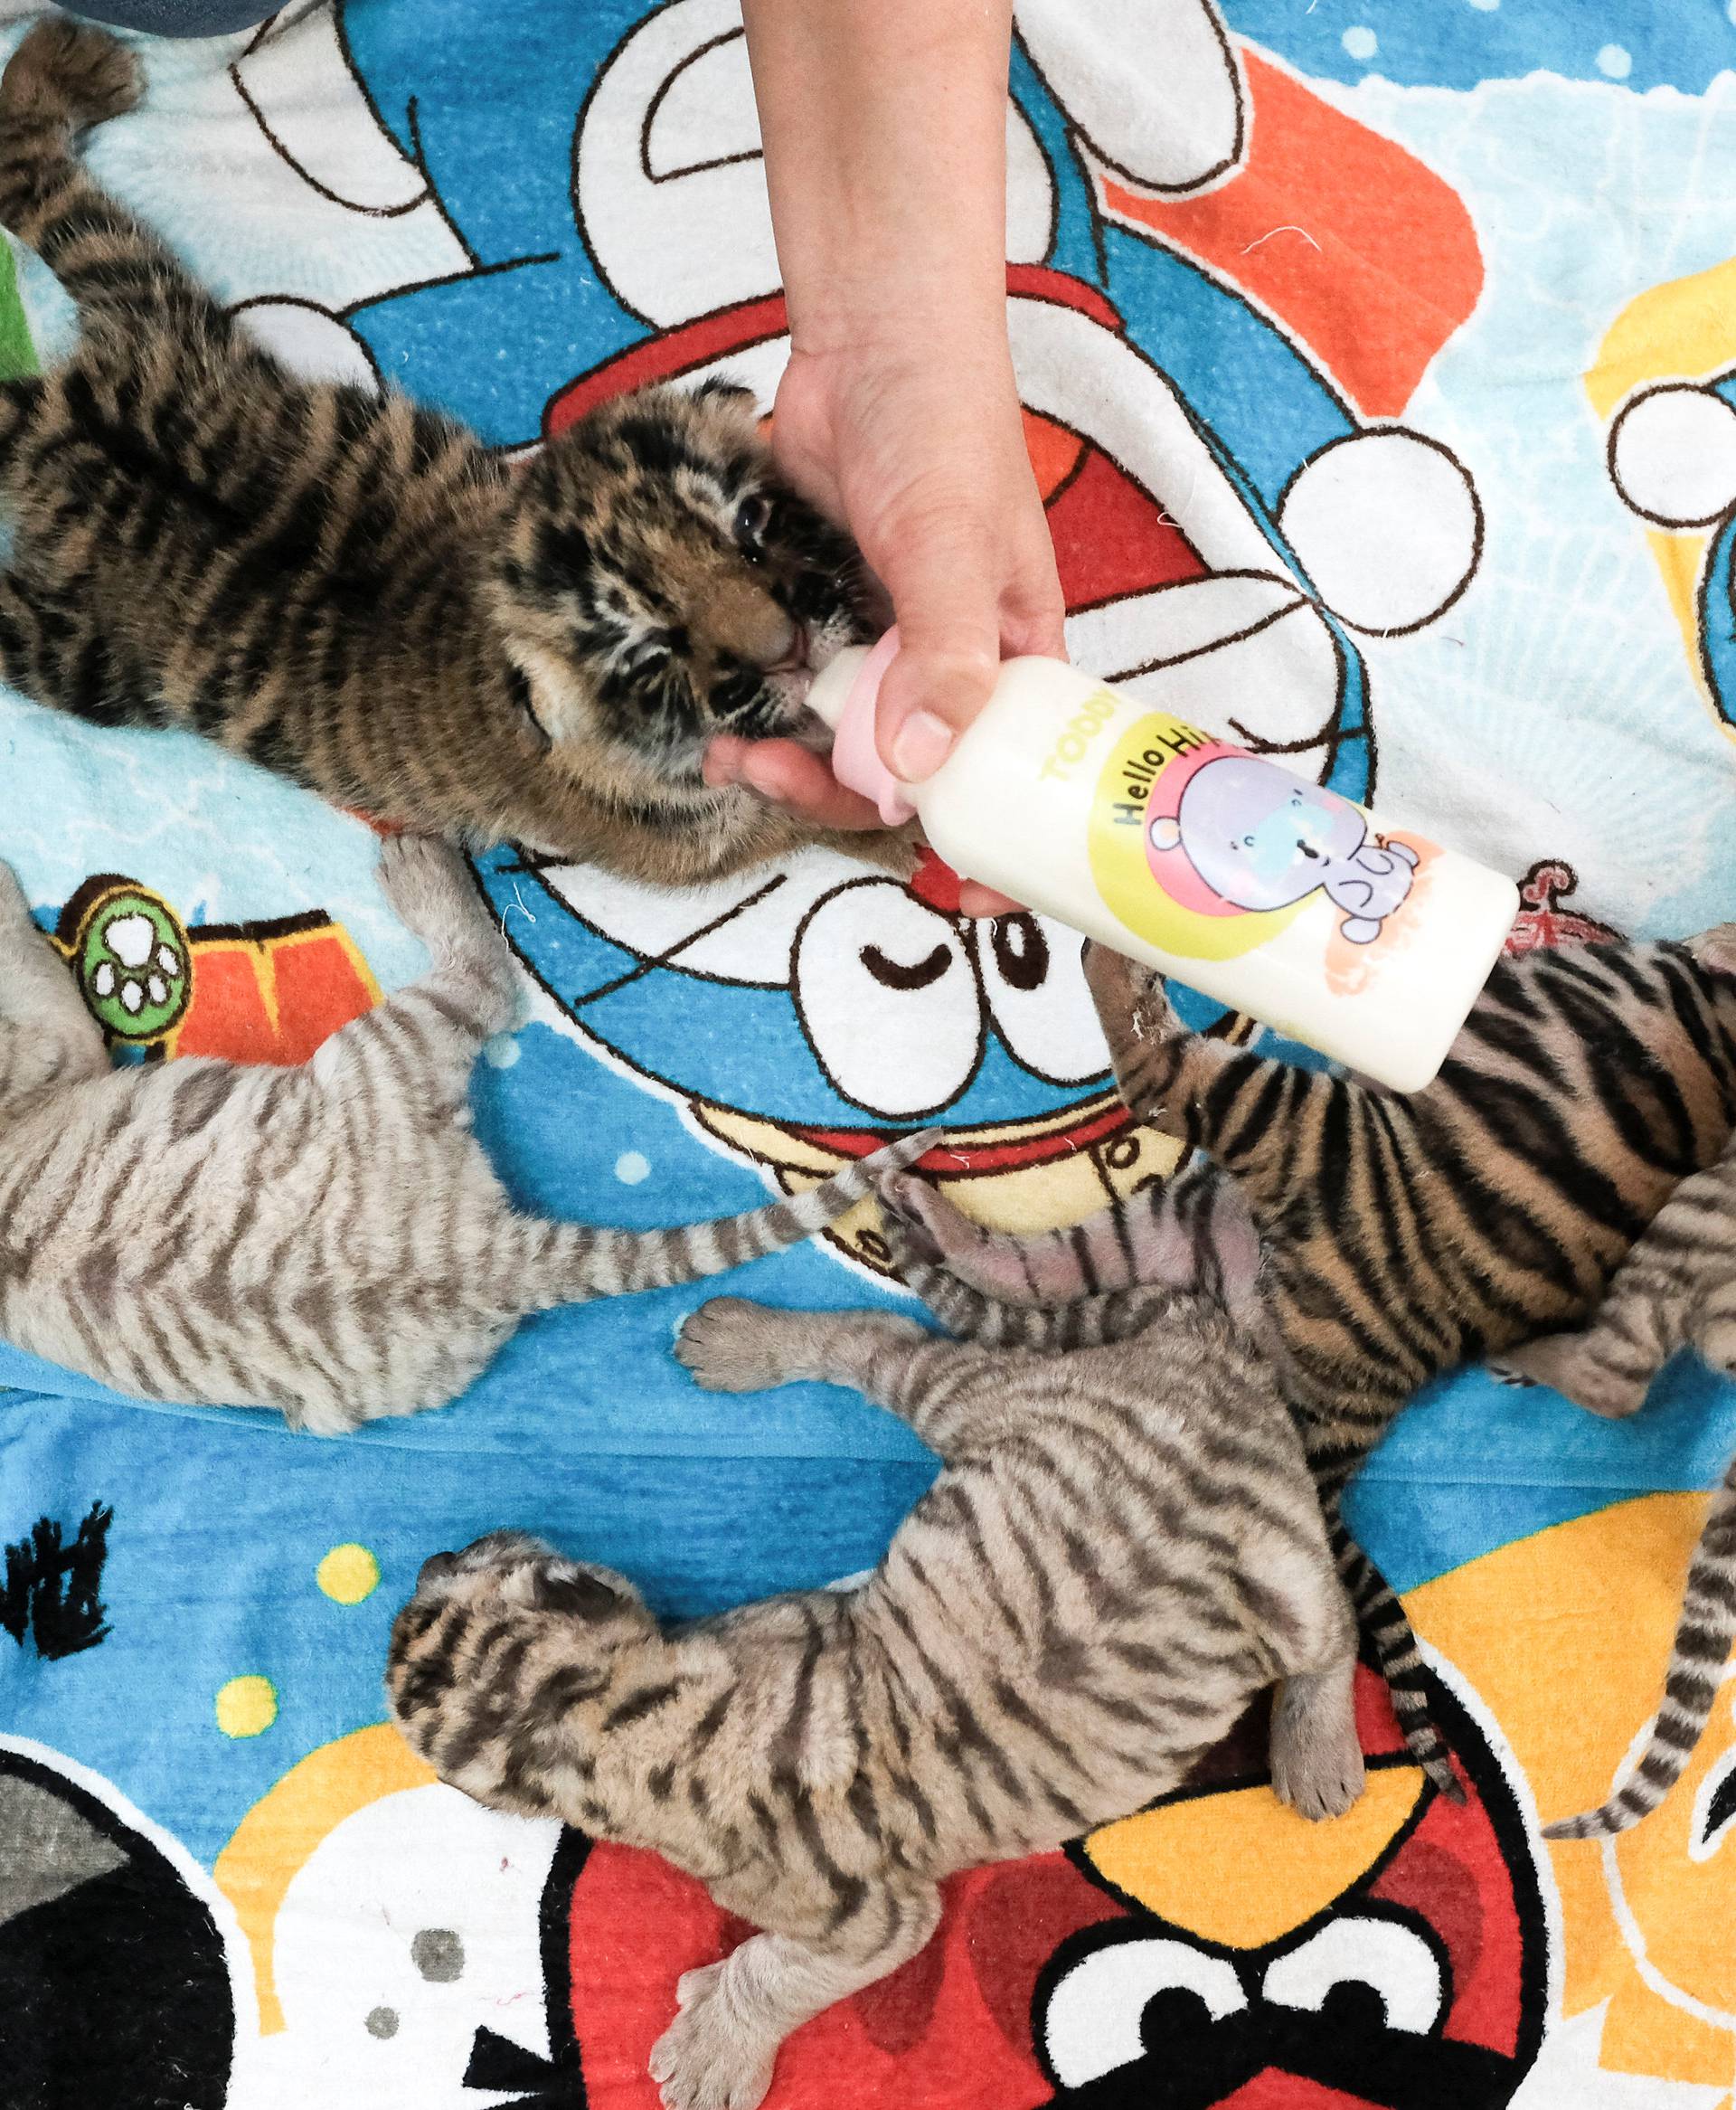 A zoo worker feeds milk to tiger cubs born on the first day of the Lunar New Year and Year of the Rooster at Sriracha Tiger Zoo in Chonburi province